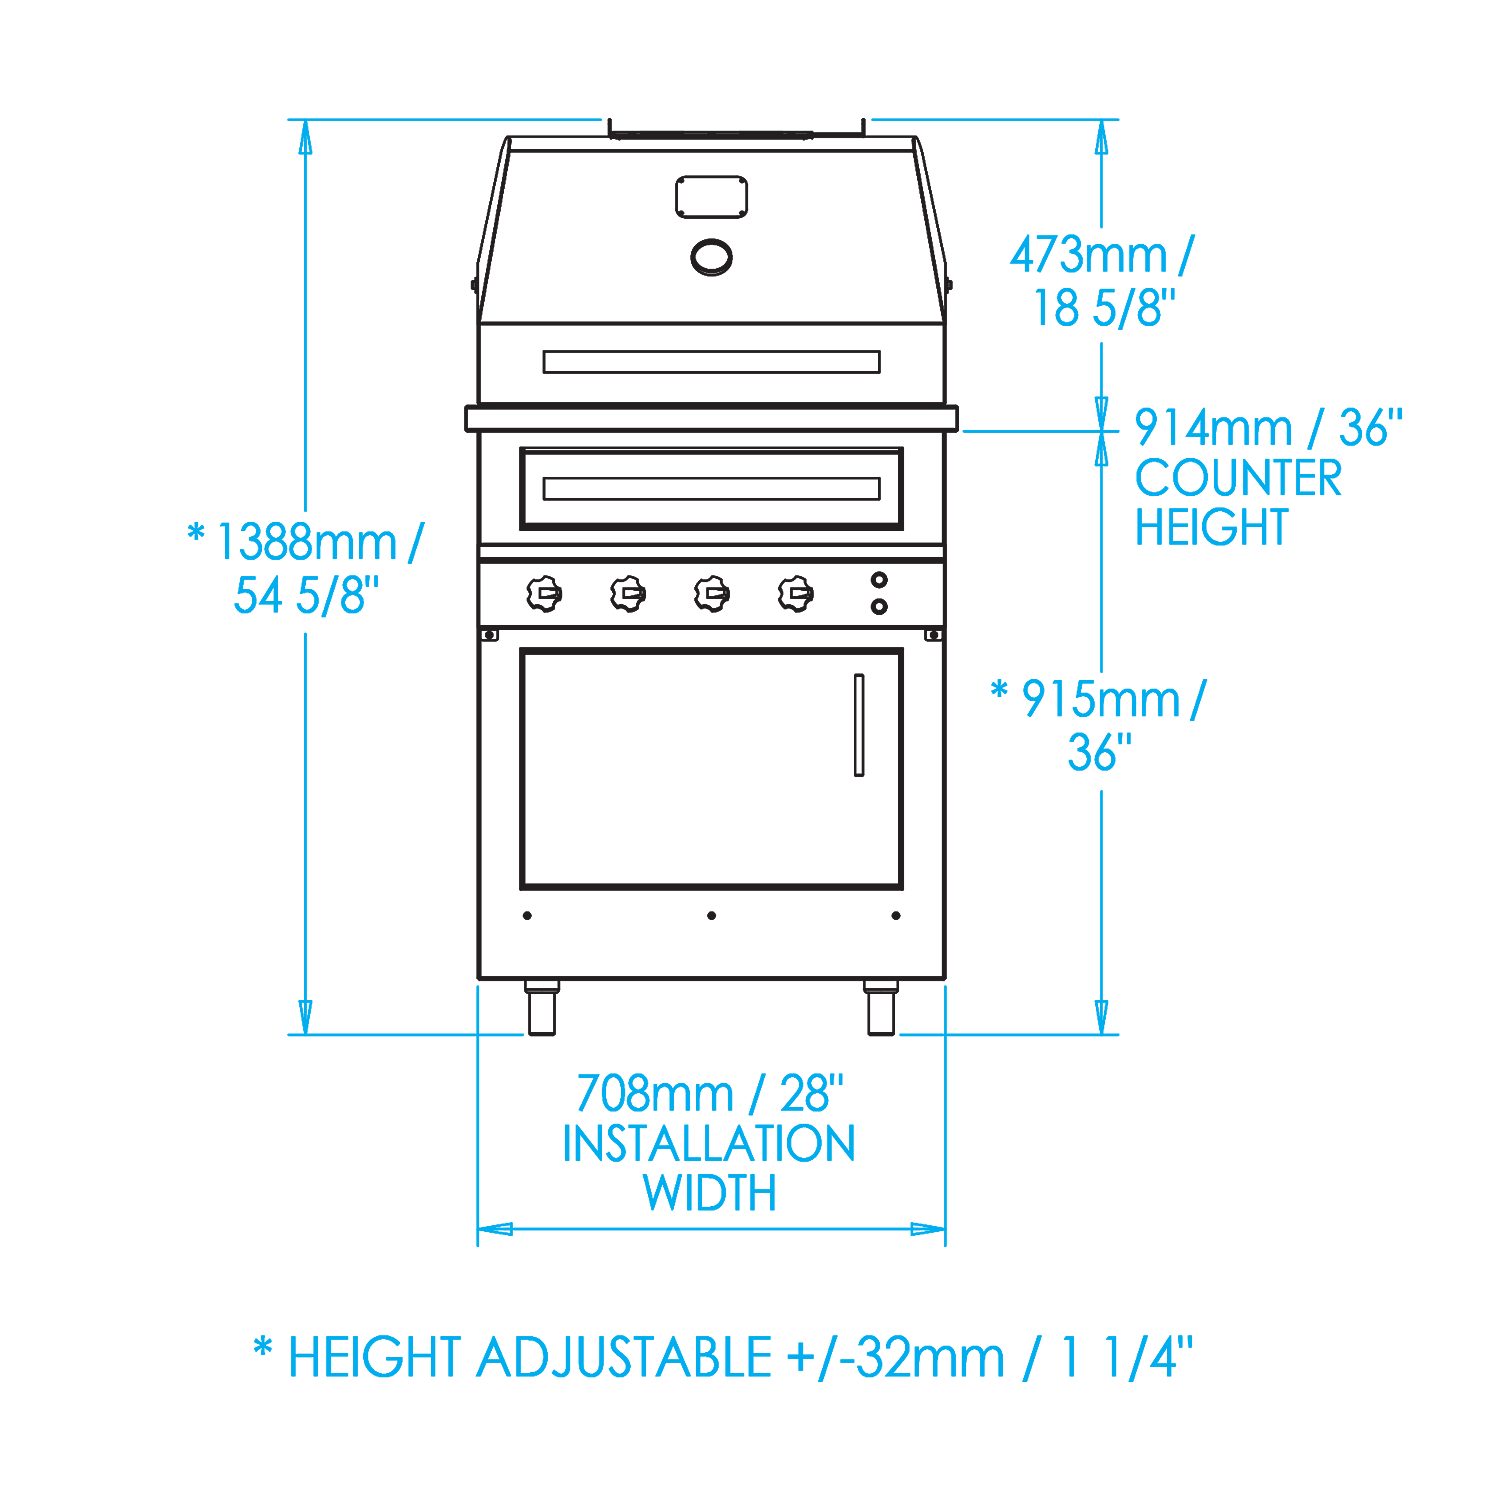 K500 Built-in Hybrid Fire Grill Dimensions Image